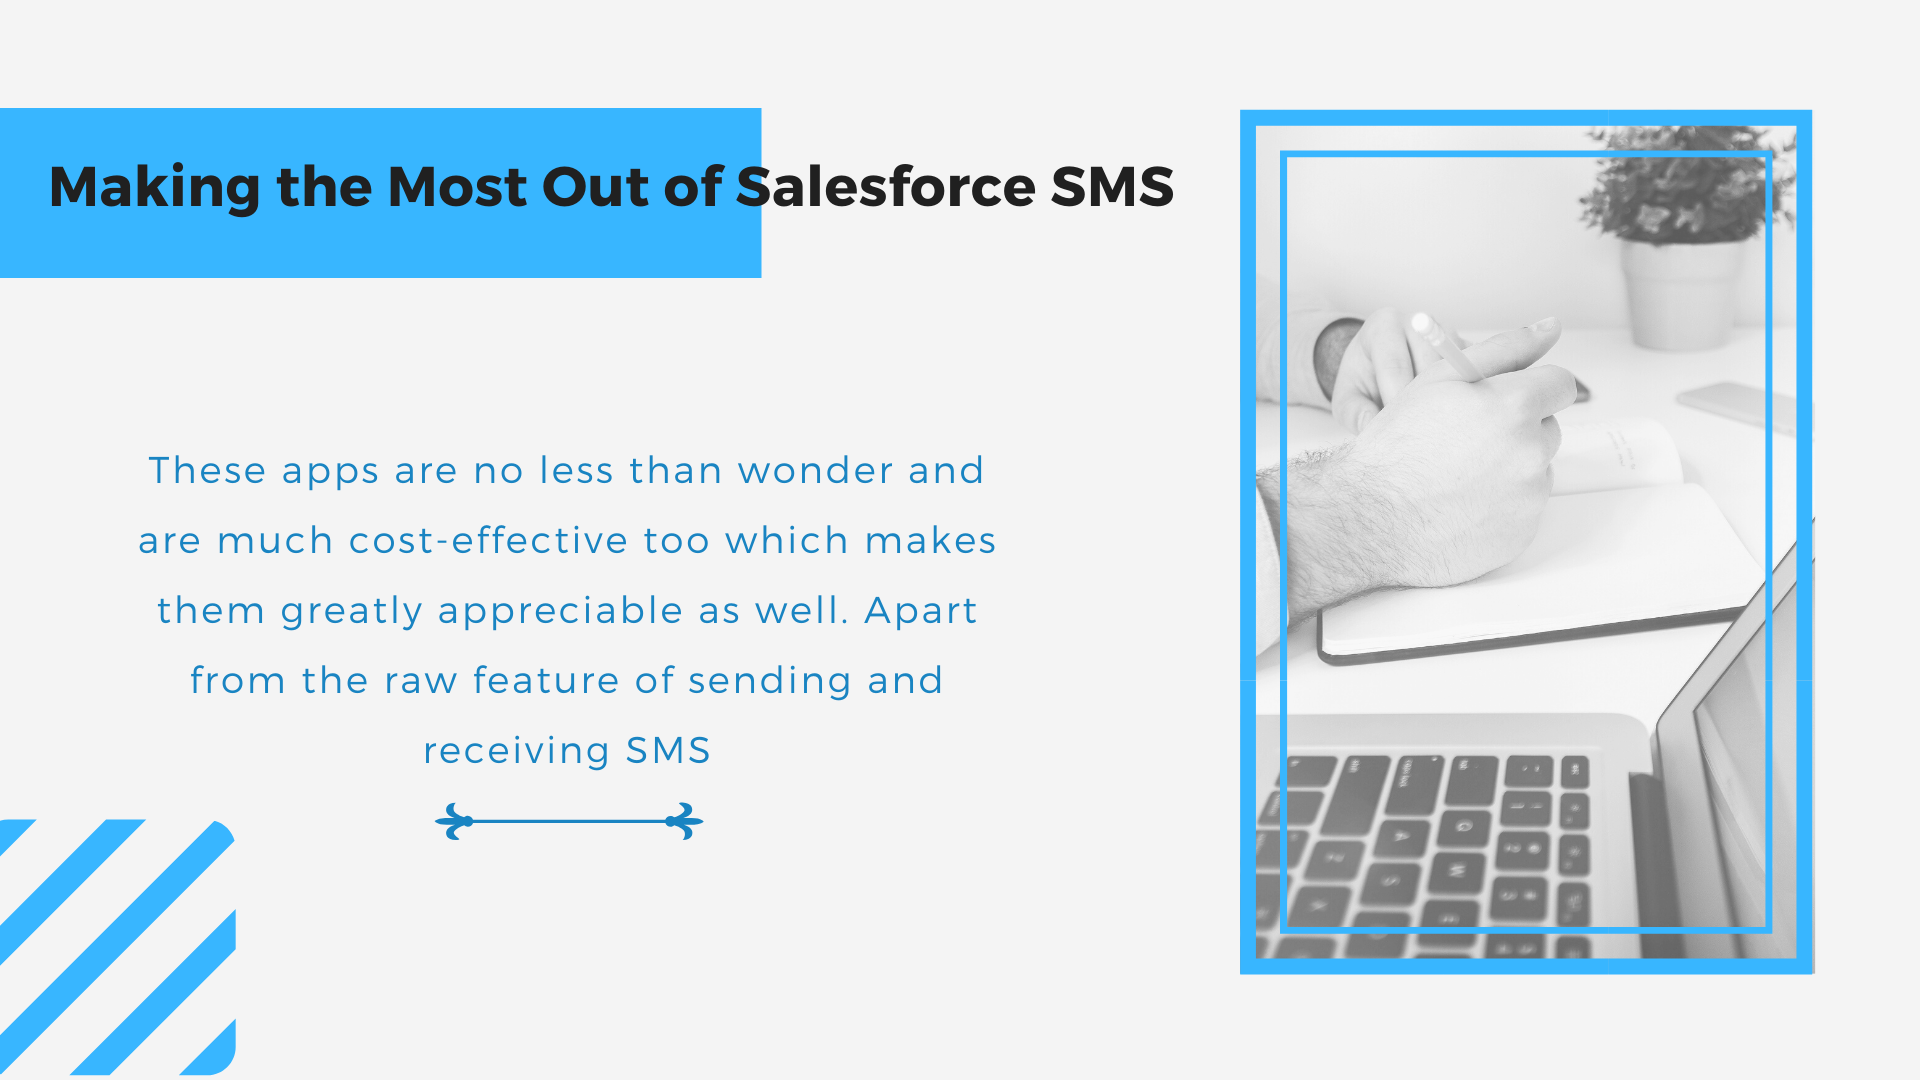 Making the Most Out of Salesforce SMS